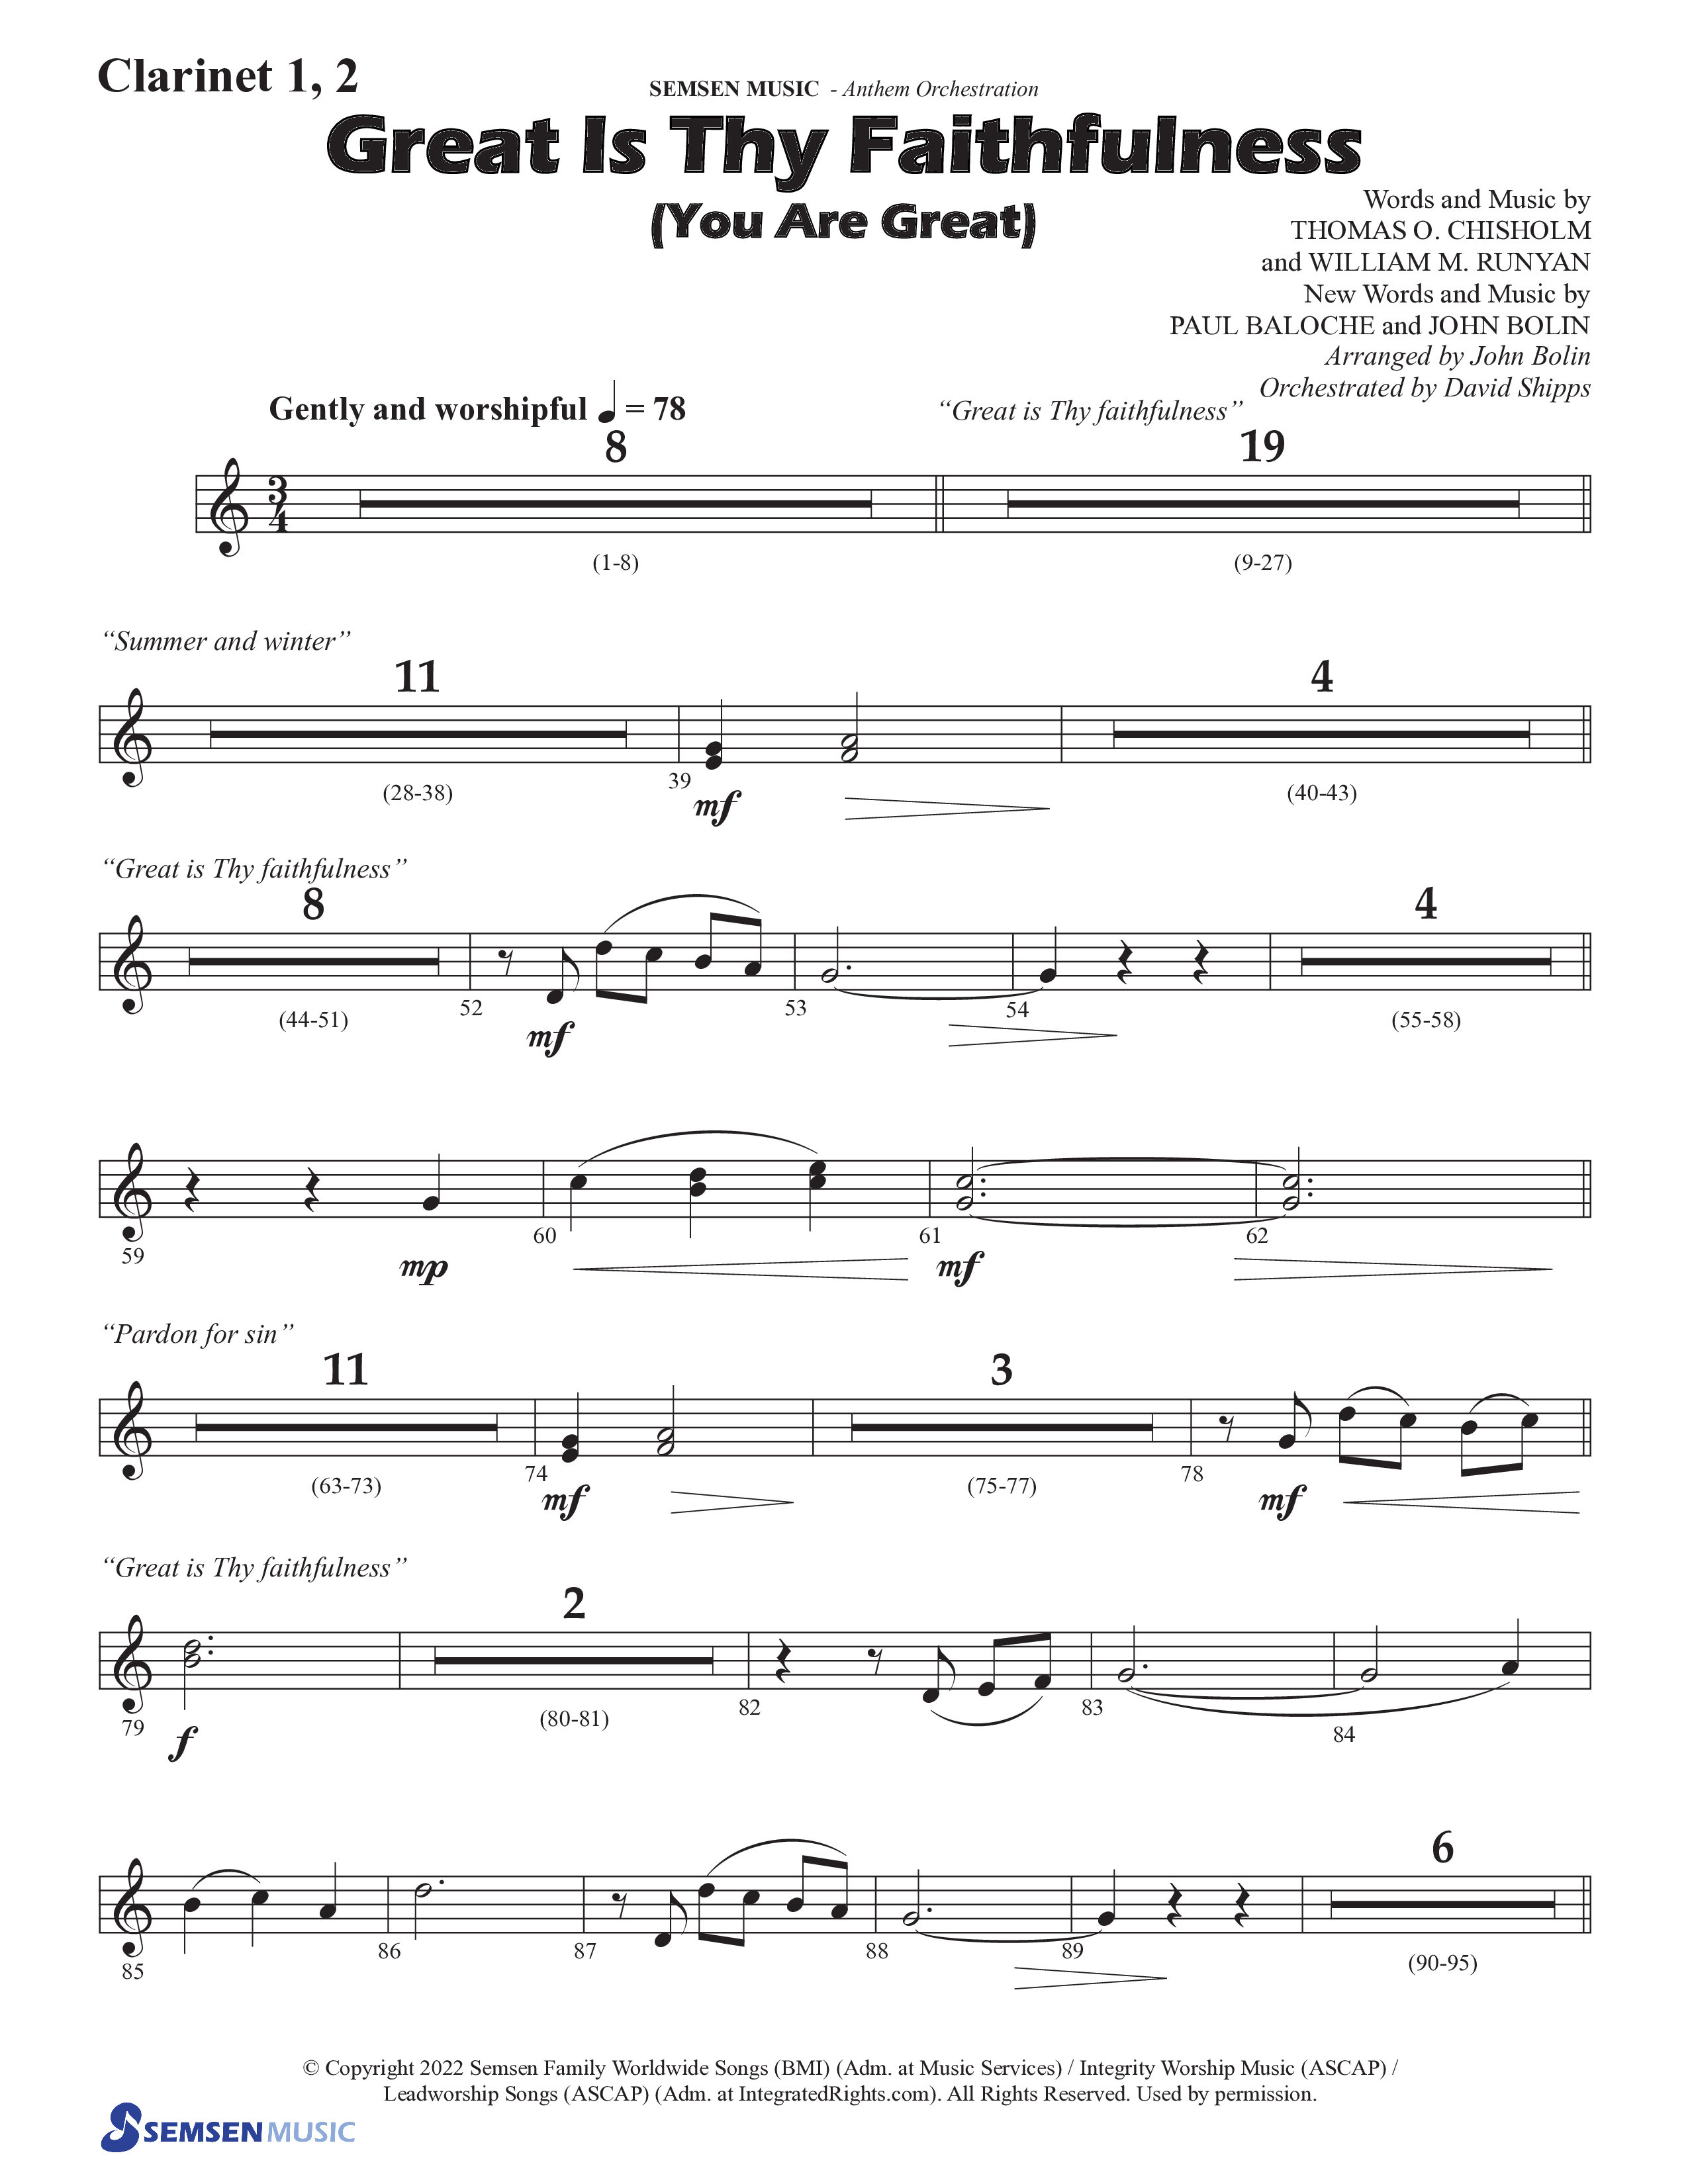 Great Is Thy Faithfulness (You Are Great) (Choral Anthem SATB) Clarinet 1/2 (Semsen Music / Arr. John Bolin / Orch. David Shipps)